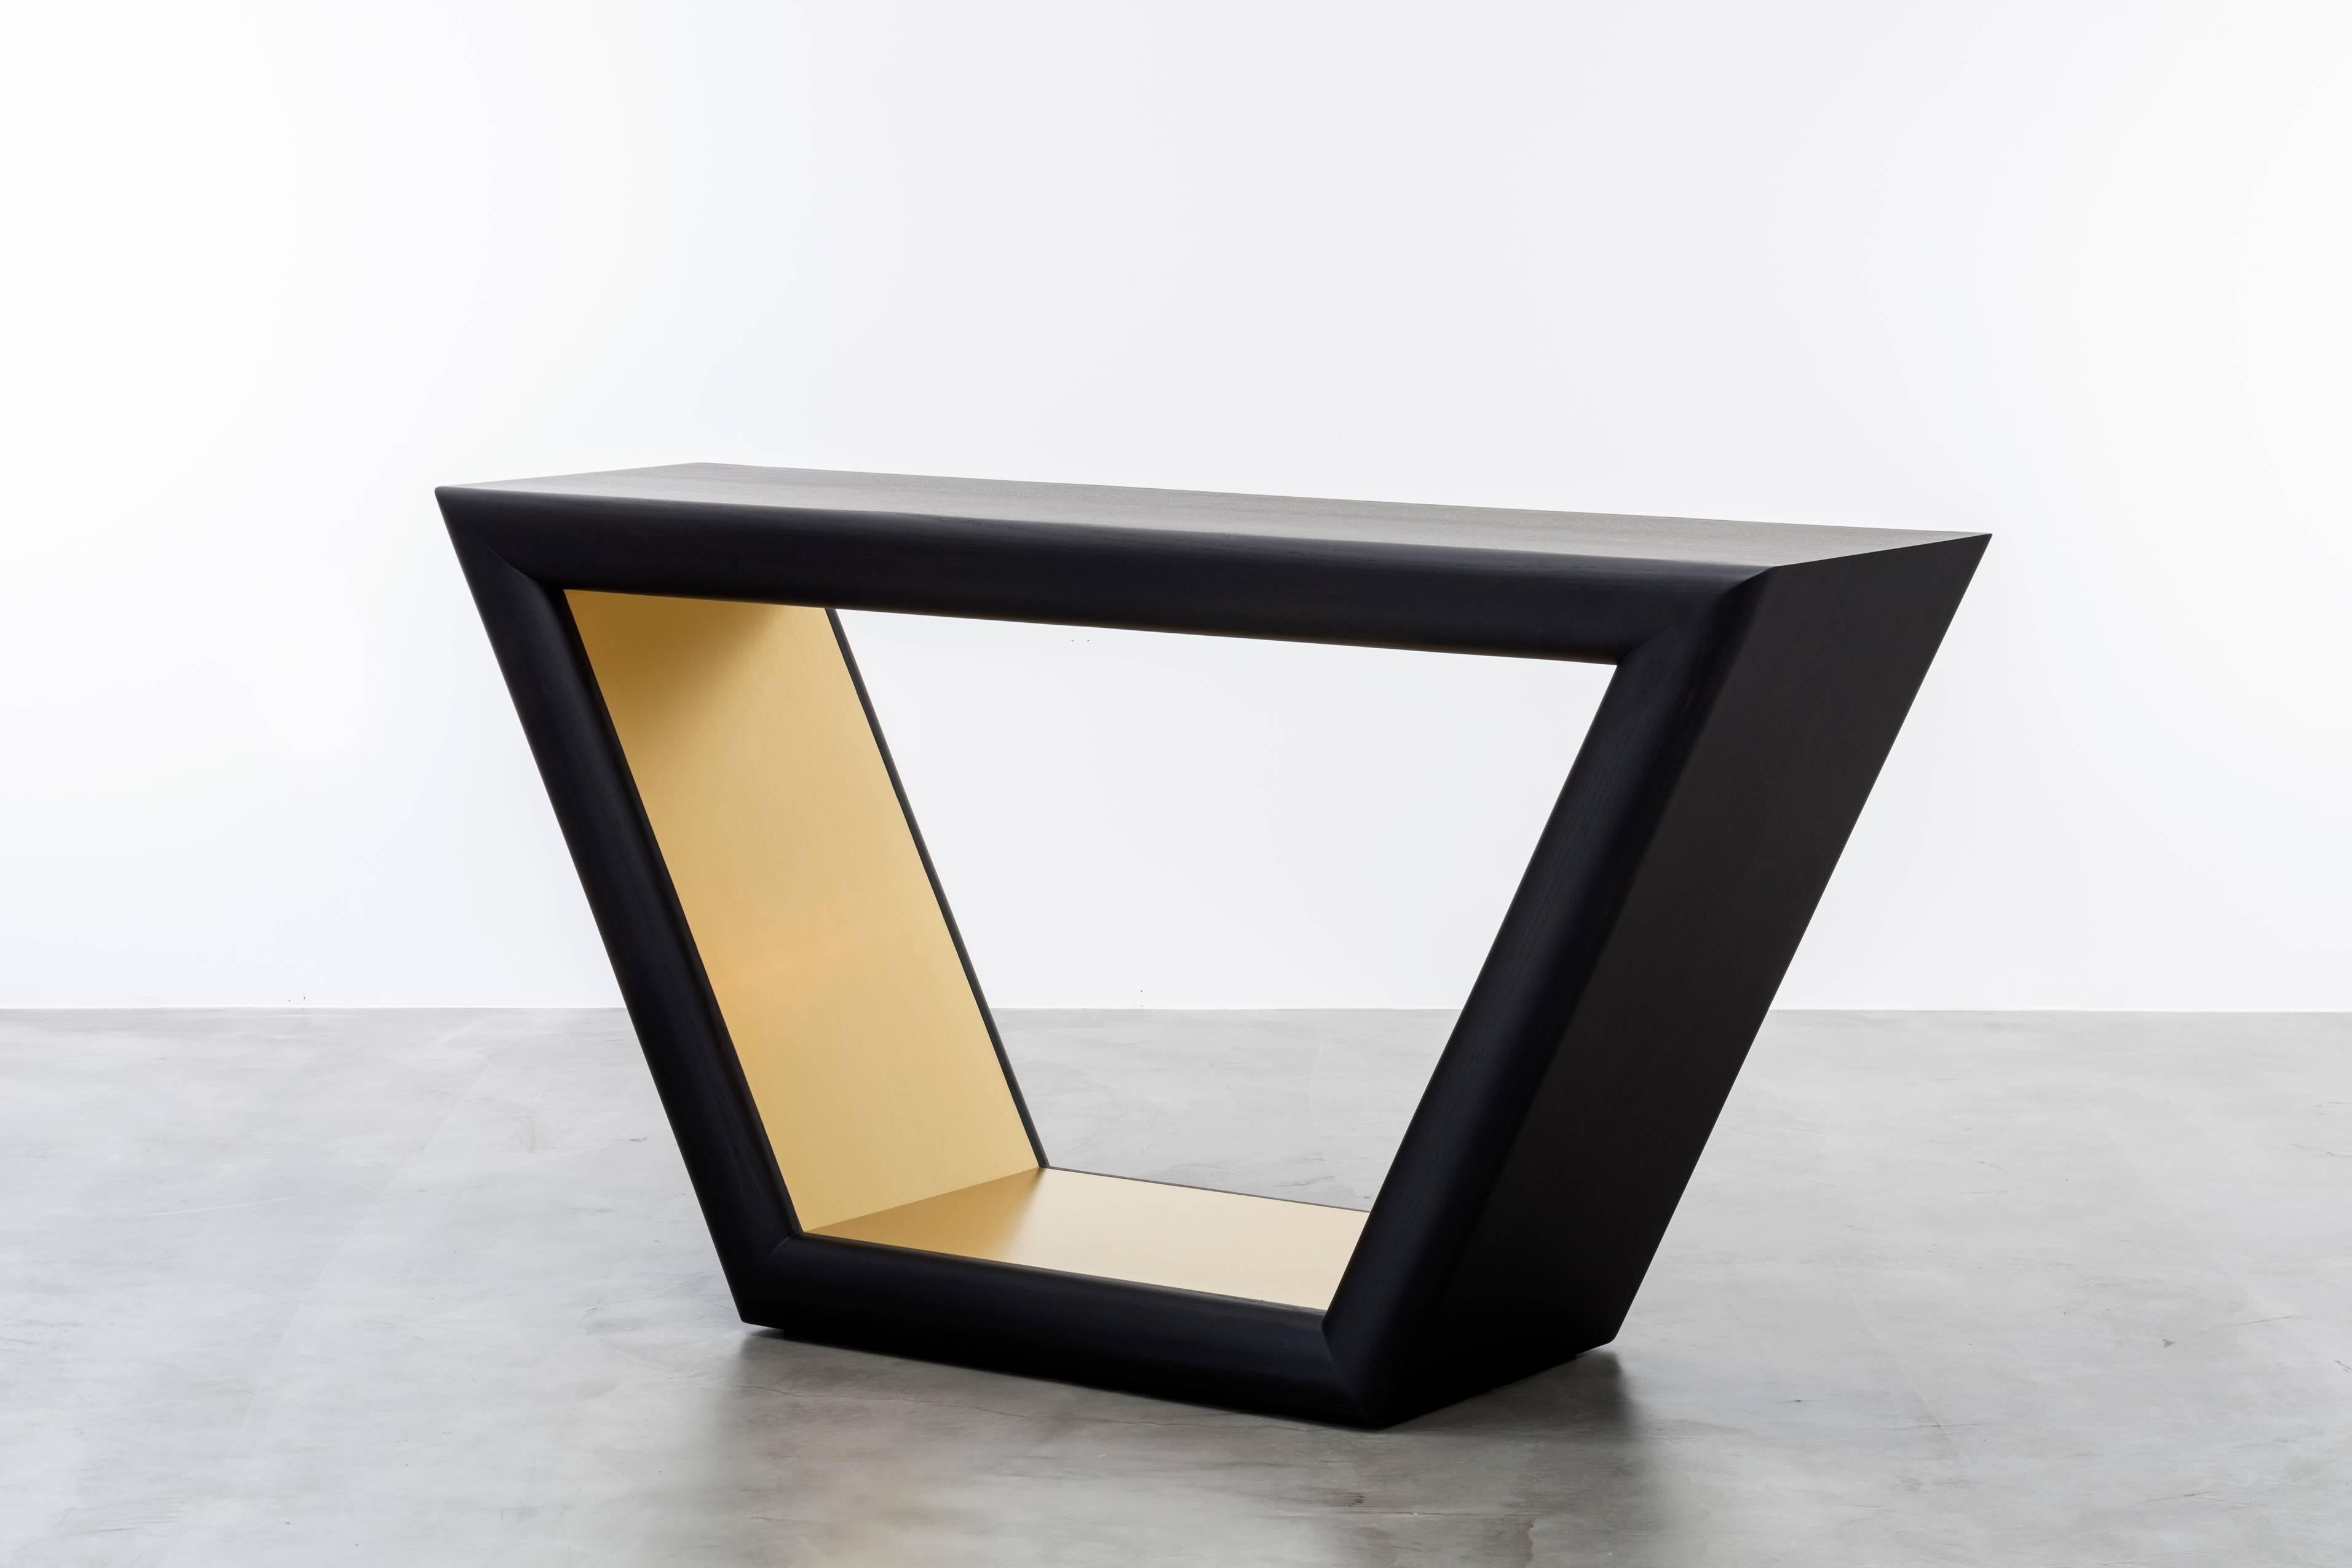 JOLIE CONSOLE - Modern Ebony Oak Console with Brass Metal Inlay

The Jolie console table is a modern and stylish piece of furniture that draws inspiration from the jewelry of the 1960s. This console table features a hand-carved bull nose detail with